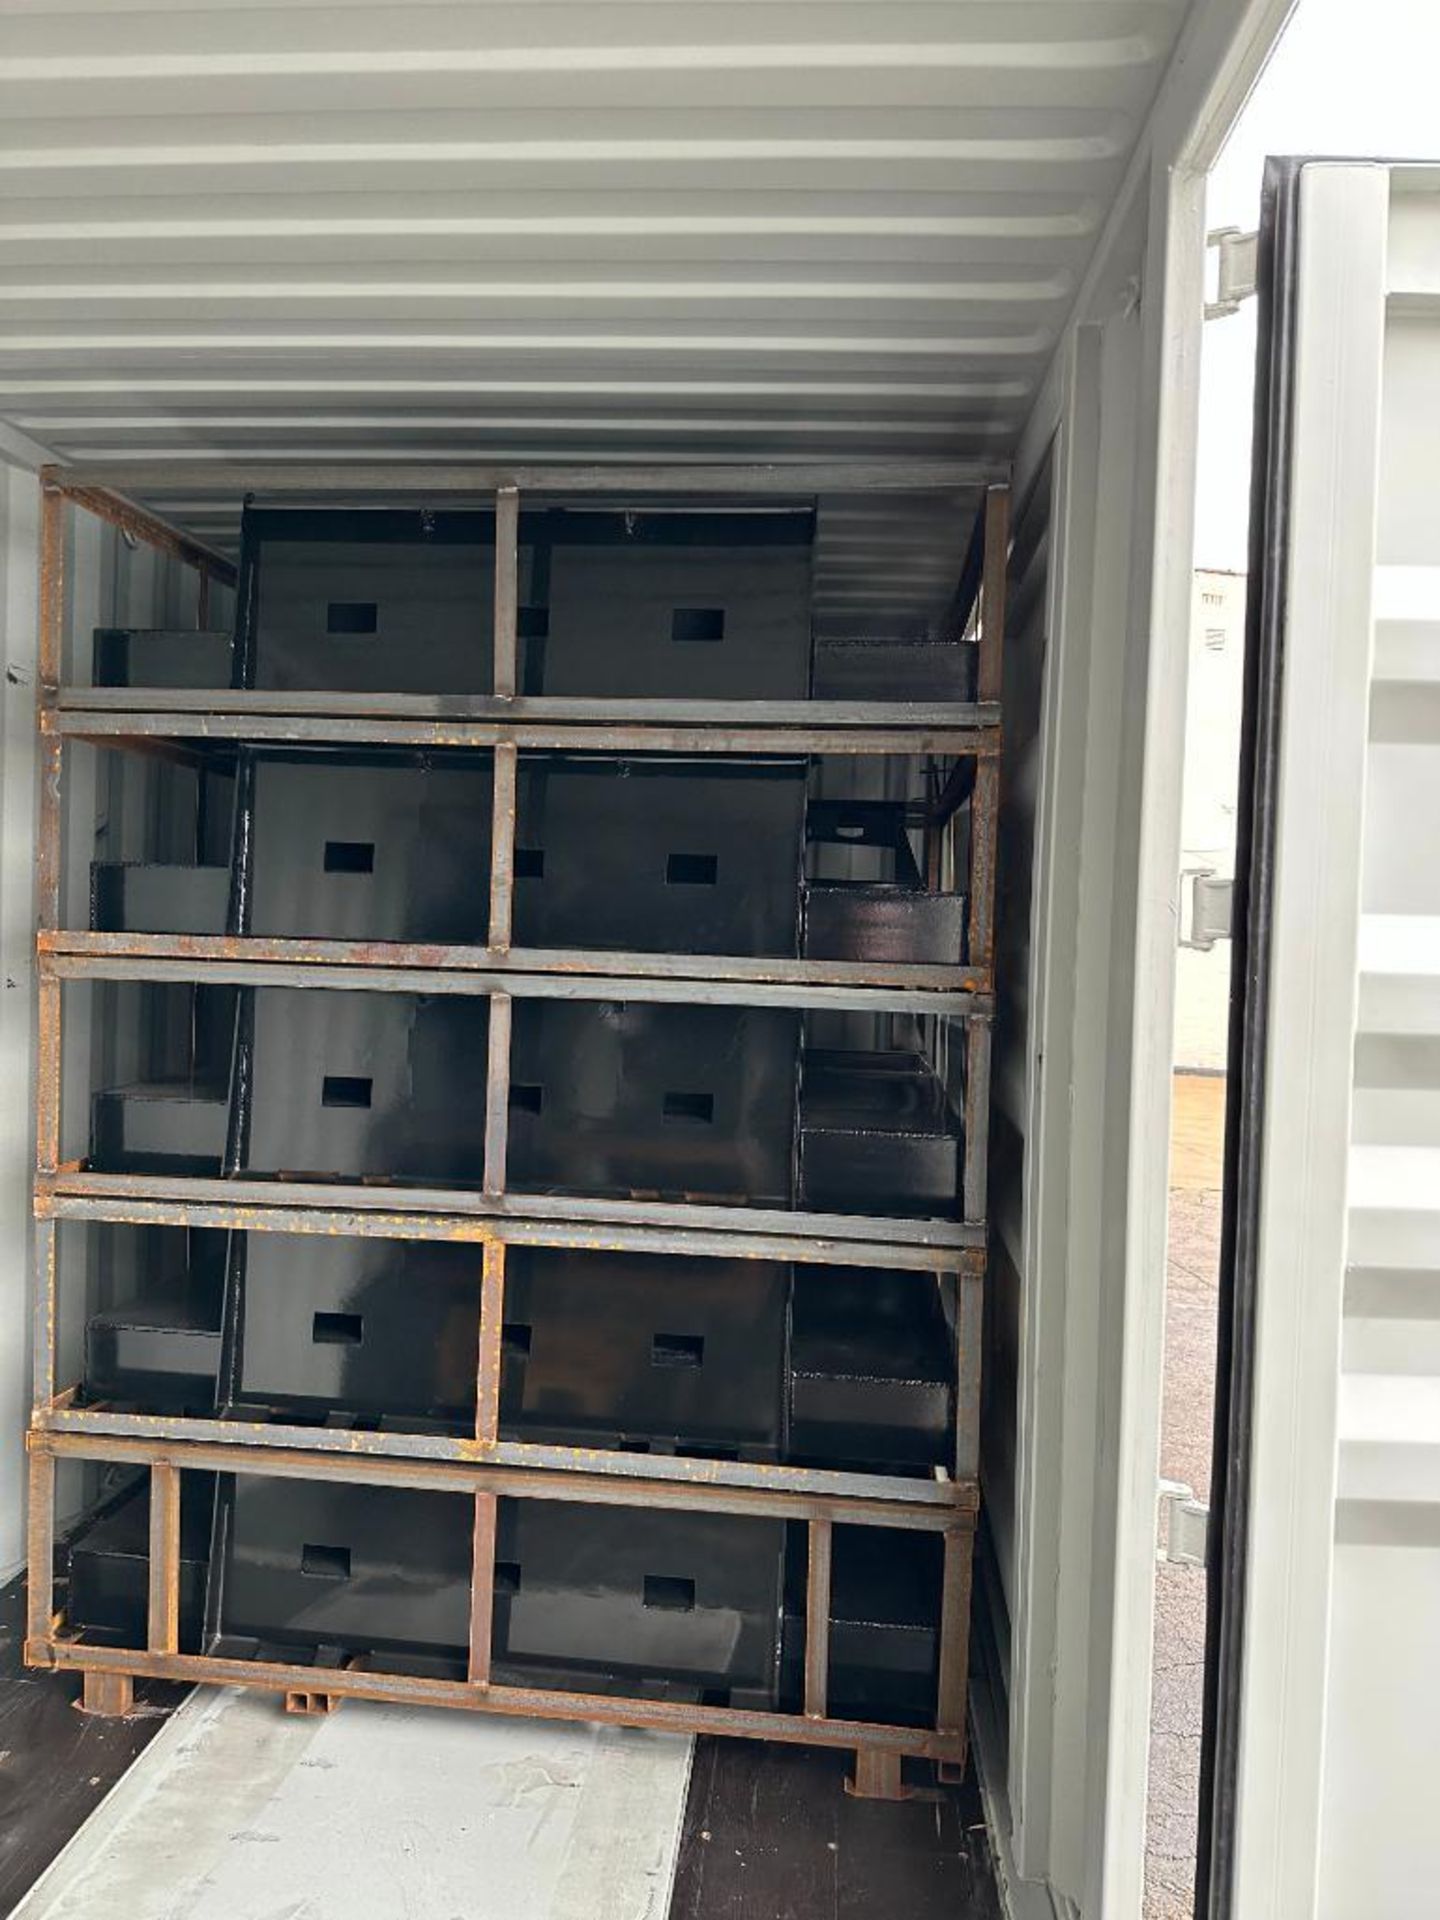 2022 40FT MULTI-DOOR SHIPPING CONTAINER BRAND/MODEL: LYGU 45G3 INFORMATION: NEW,2022 STORAGE CONTAIN - Image 18 of 23